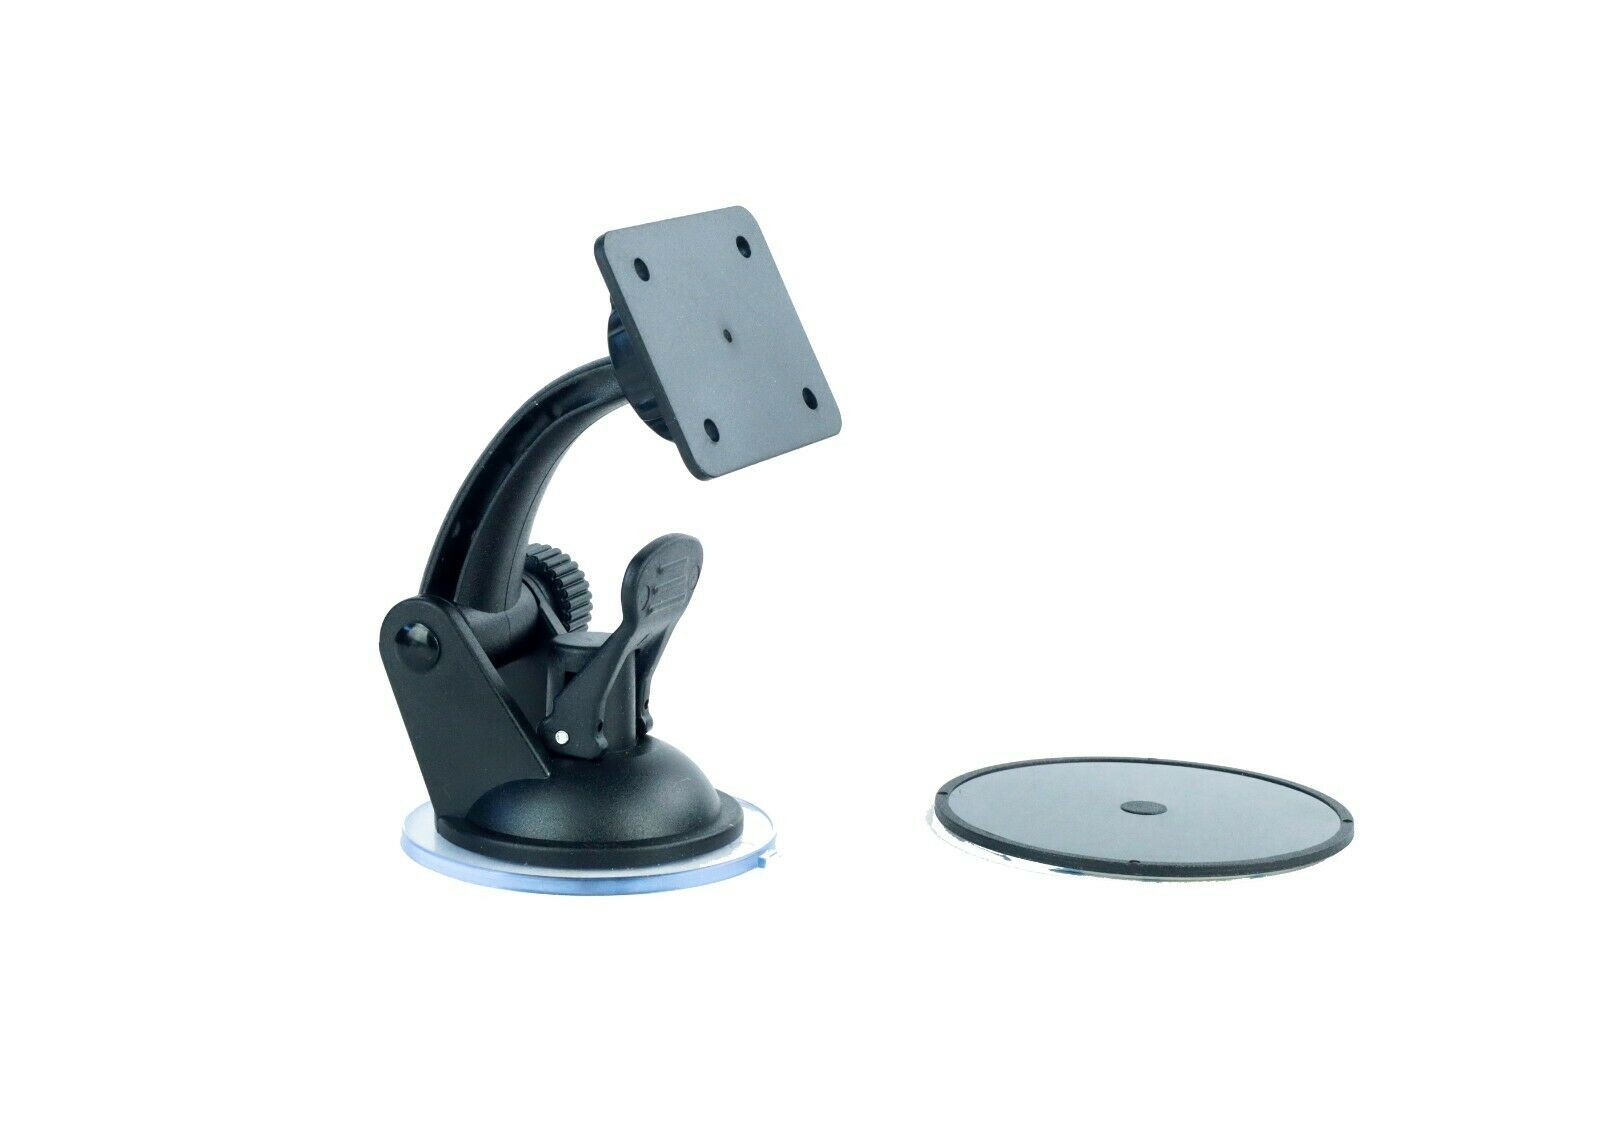 Suction Cup Mount